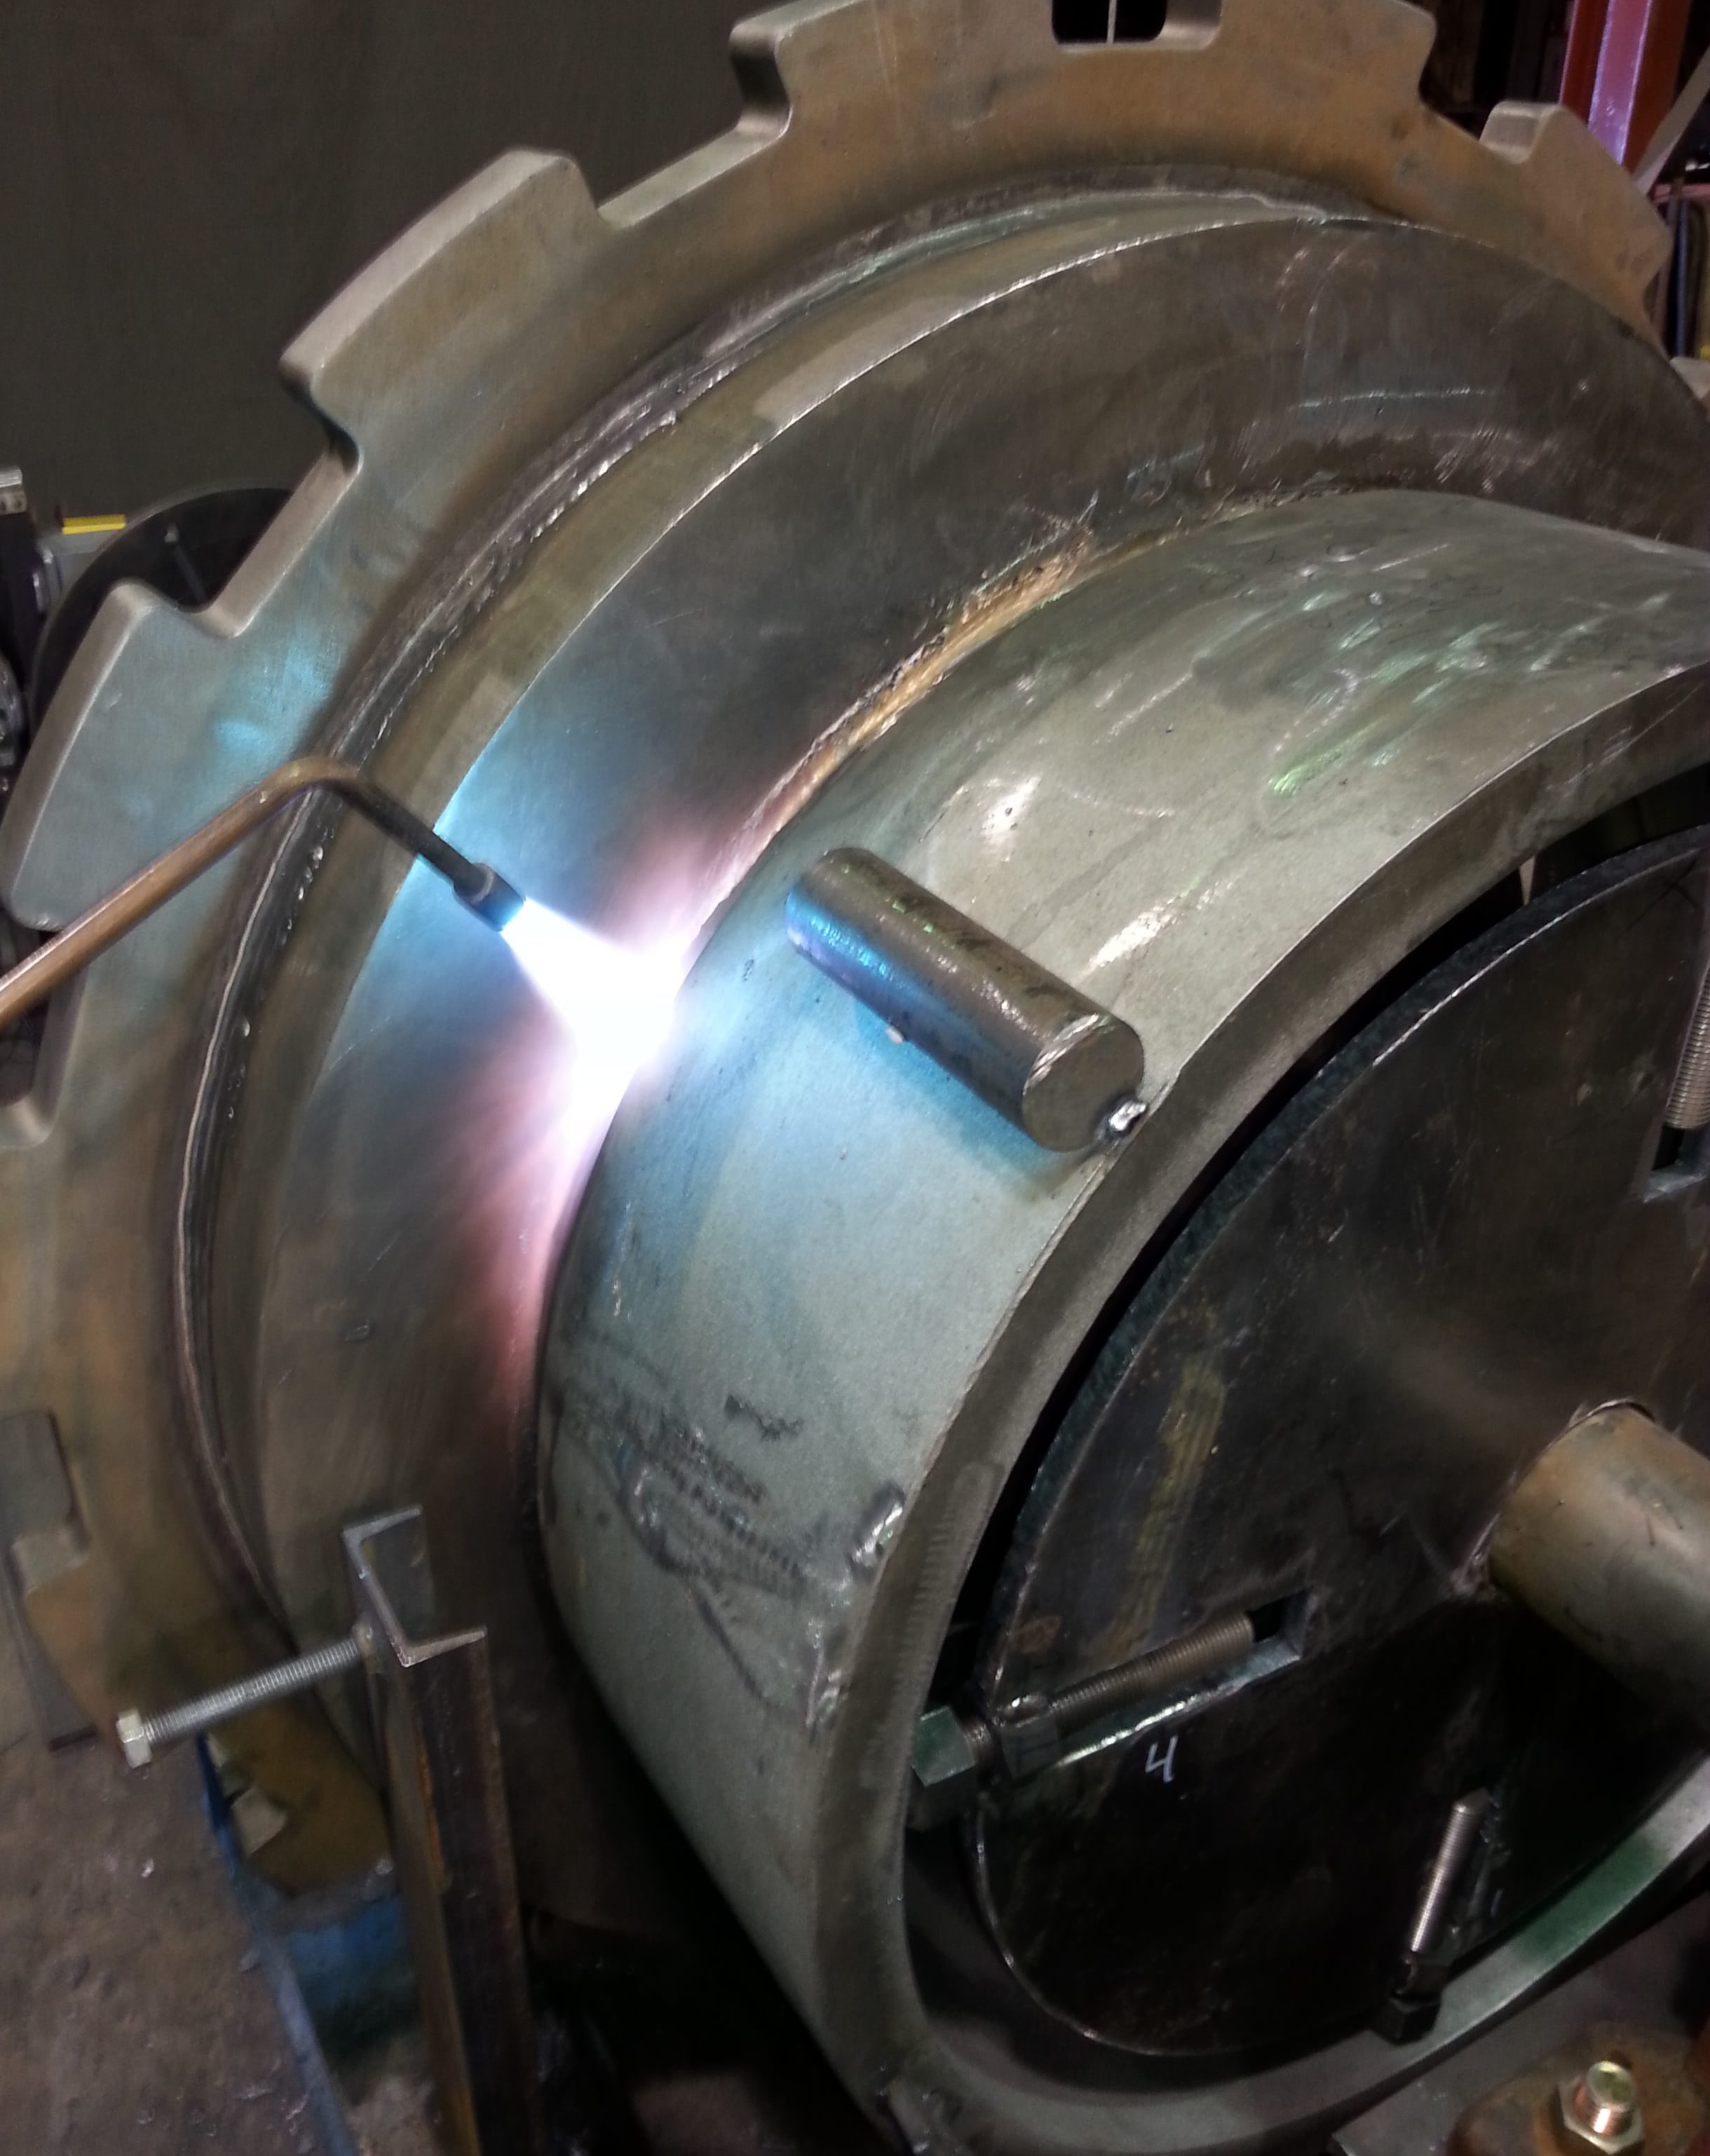 Preheating of fabricated rotating assembly for a rotary table. Preheating ensures minimal stress on material and ensures a full penetration weld